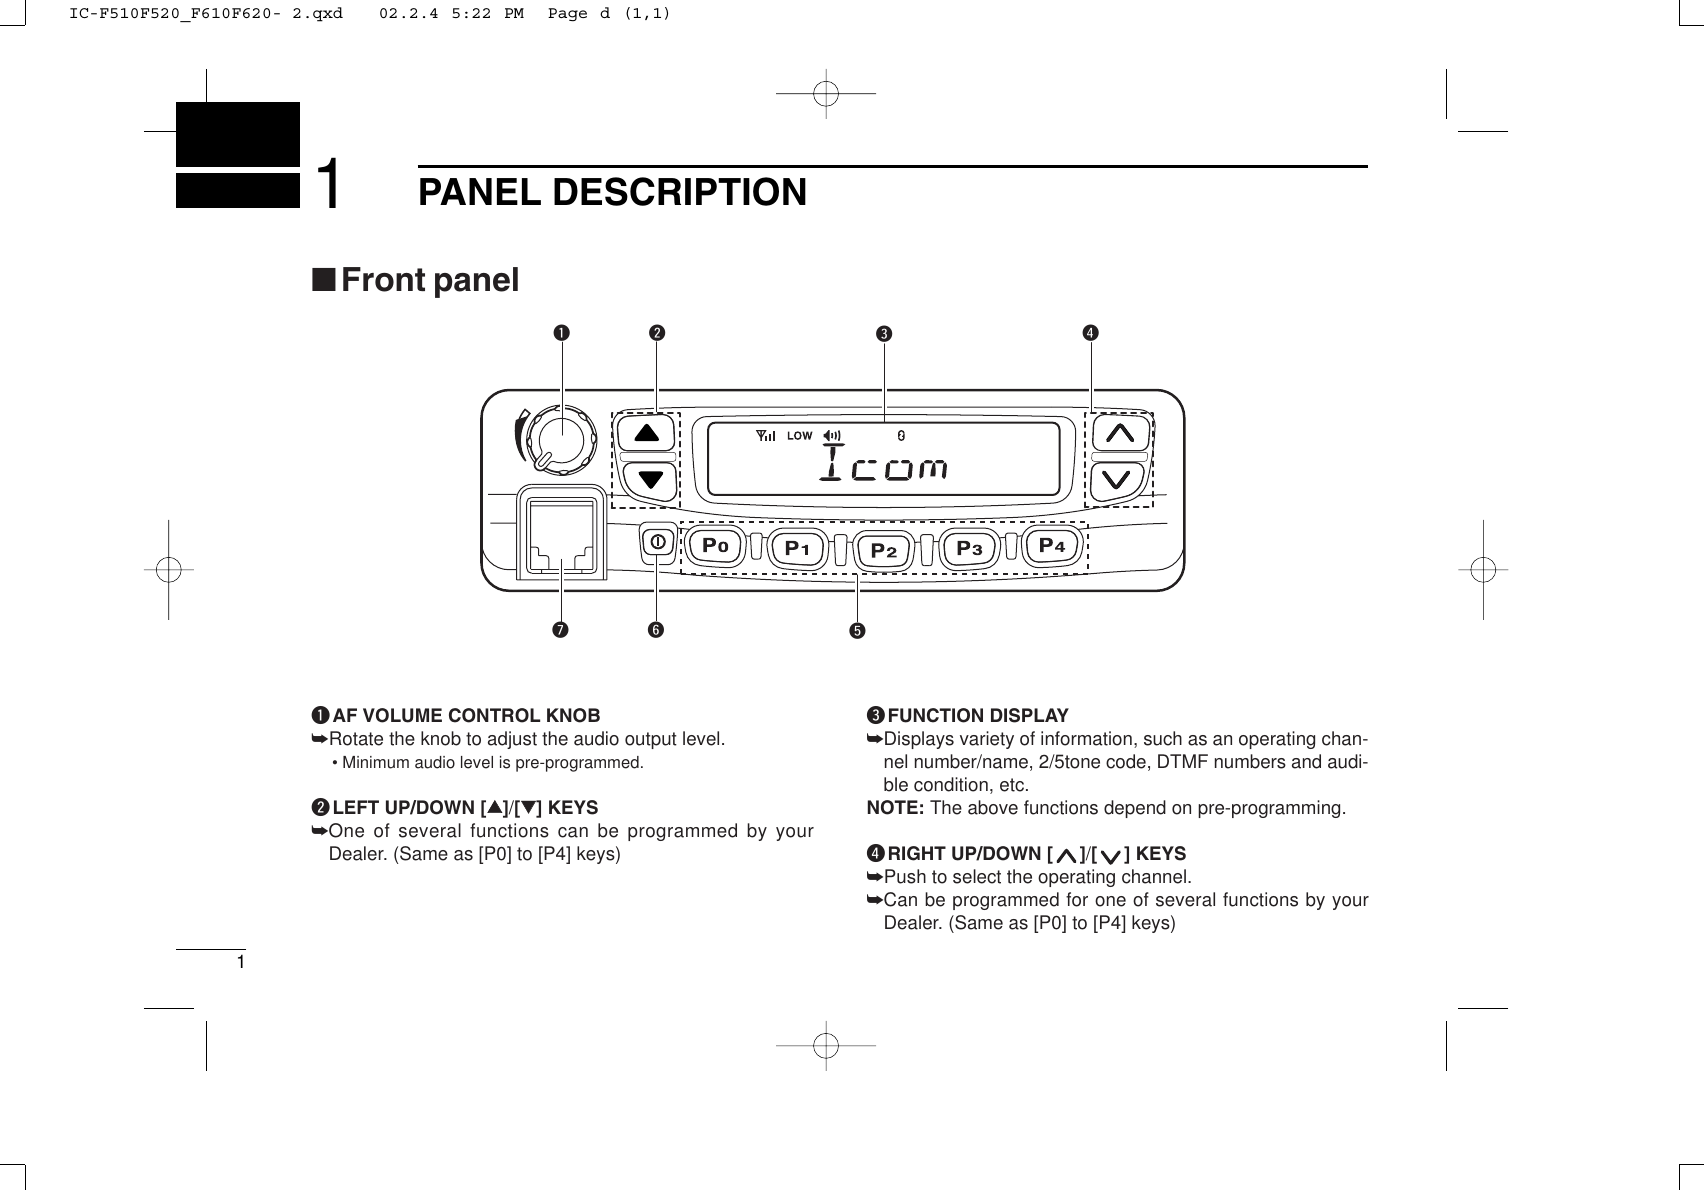 11PANEL DESCRIPTIONuytrewq■Front panelqAF VOLUME CONTROL KNOB➥Rotate the knob to adjust the audio output level.• Minimum audio level is pre-programmed.wLEFT UP/DOWN [∫∫]/[√√] KEYS➥One of several functions can be programmed by yourDealer. (Same as [P0] to [P4] keys)eFUNCTION DISPLAY➥Displays variety of information, such as an operating chan-nel number/name, 2/5tone code, DTMF numbers and audi-ble condition, etc.NOTE: The above functions depend on pre-programming.rRIGHT UP/DOWN [ ]/[ ] KEYS➥Push to select the operating channel.➥Can be programmed for one of several functions by yourDealer. (Same as [P0] to [P4] keys)IC-F510F520_F610F620- 2.qxd   02.2.4 5:22 PM  Page d (1,1)